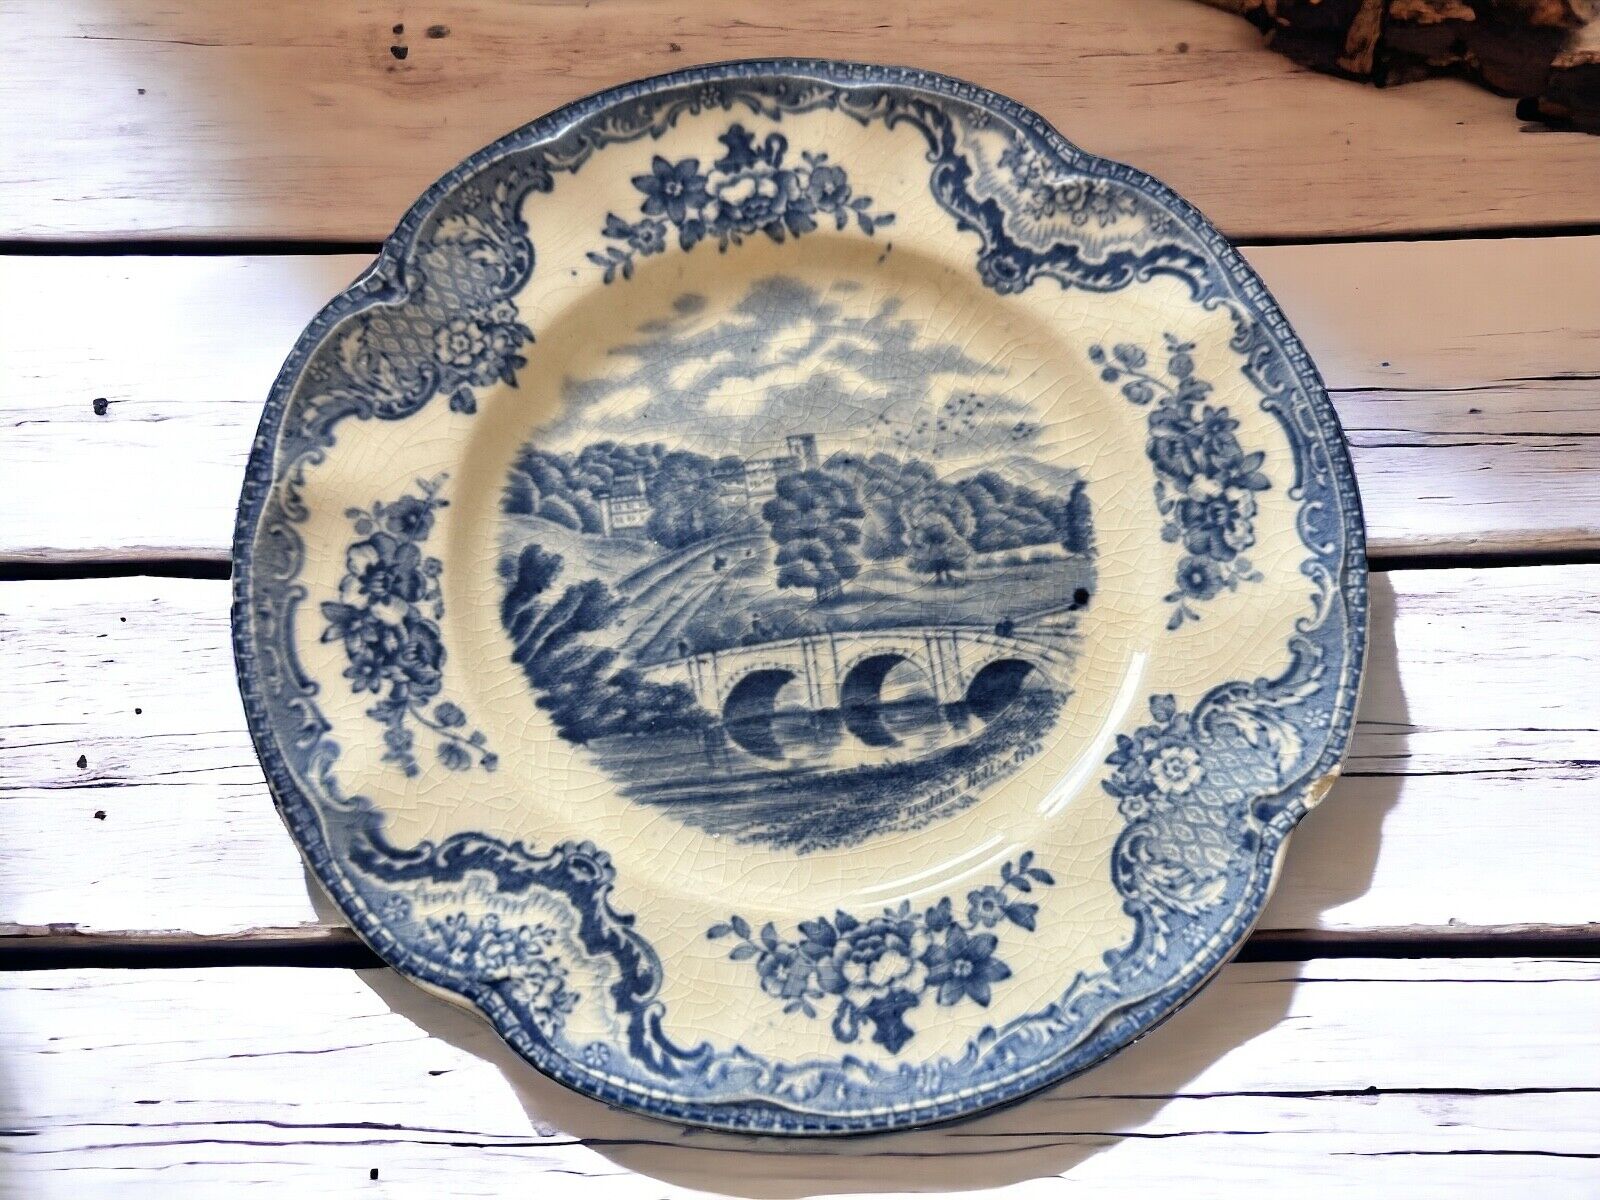 Haddon Hall 1792 Old Britain Castles Collection Blue and White Dinner Plate